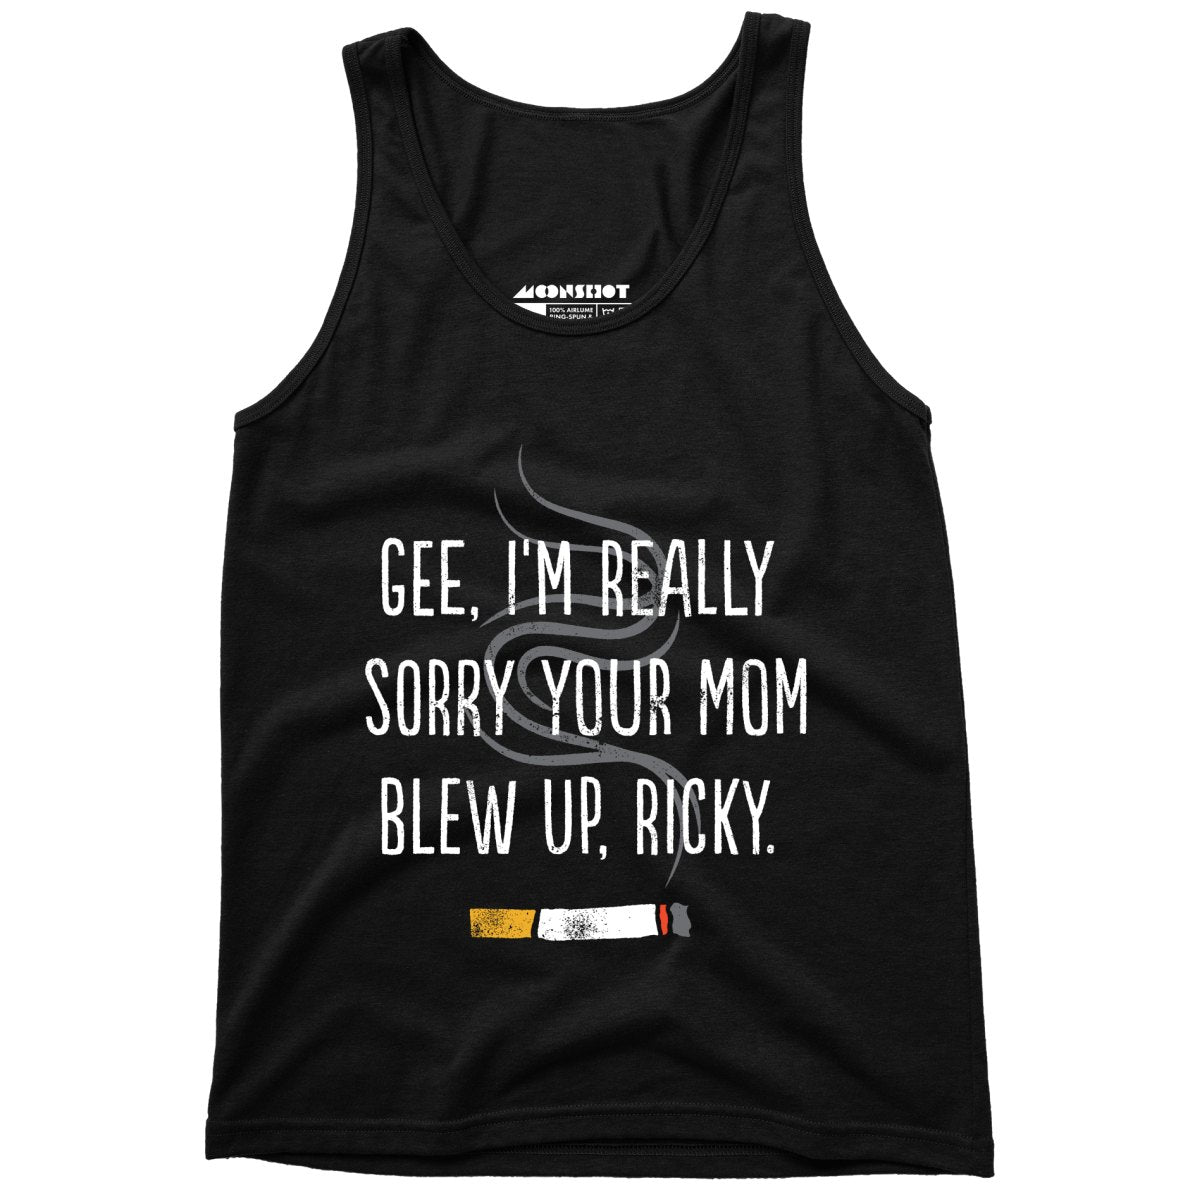 Gee, I'm Really Sorry Your Mom Blew Up, Ricky - Unisex Tank Top